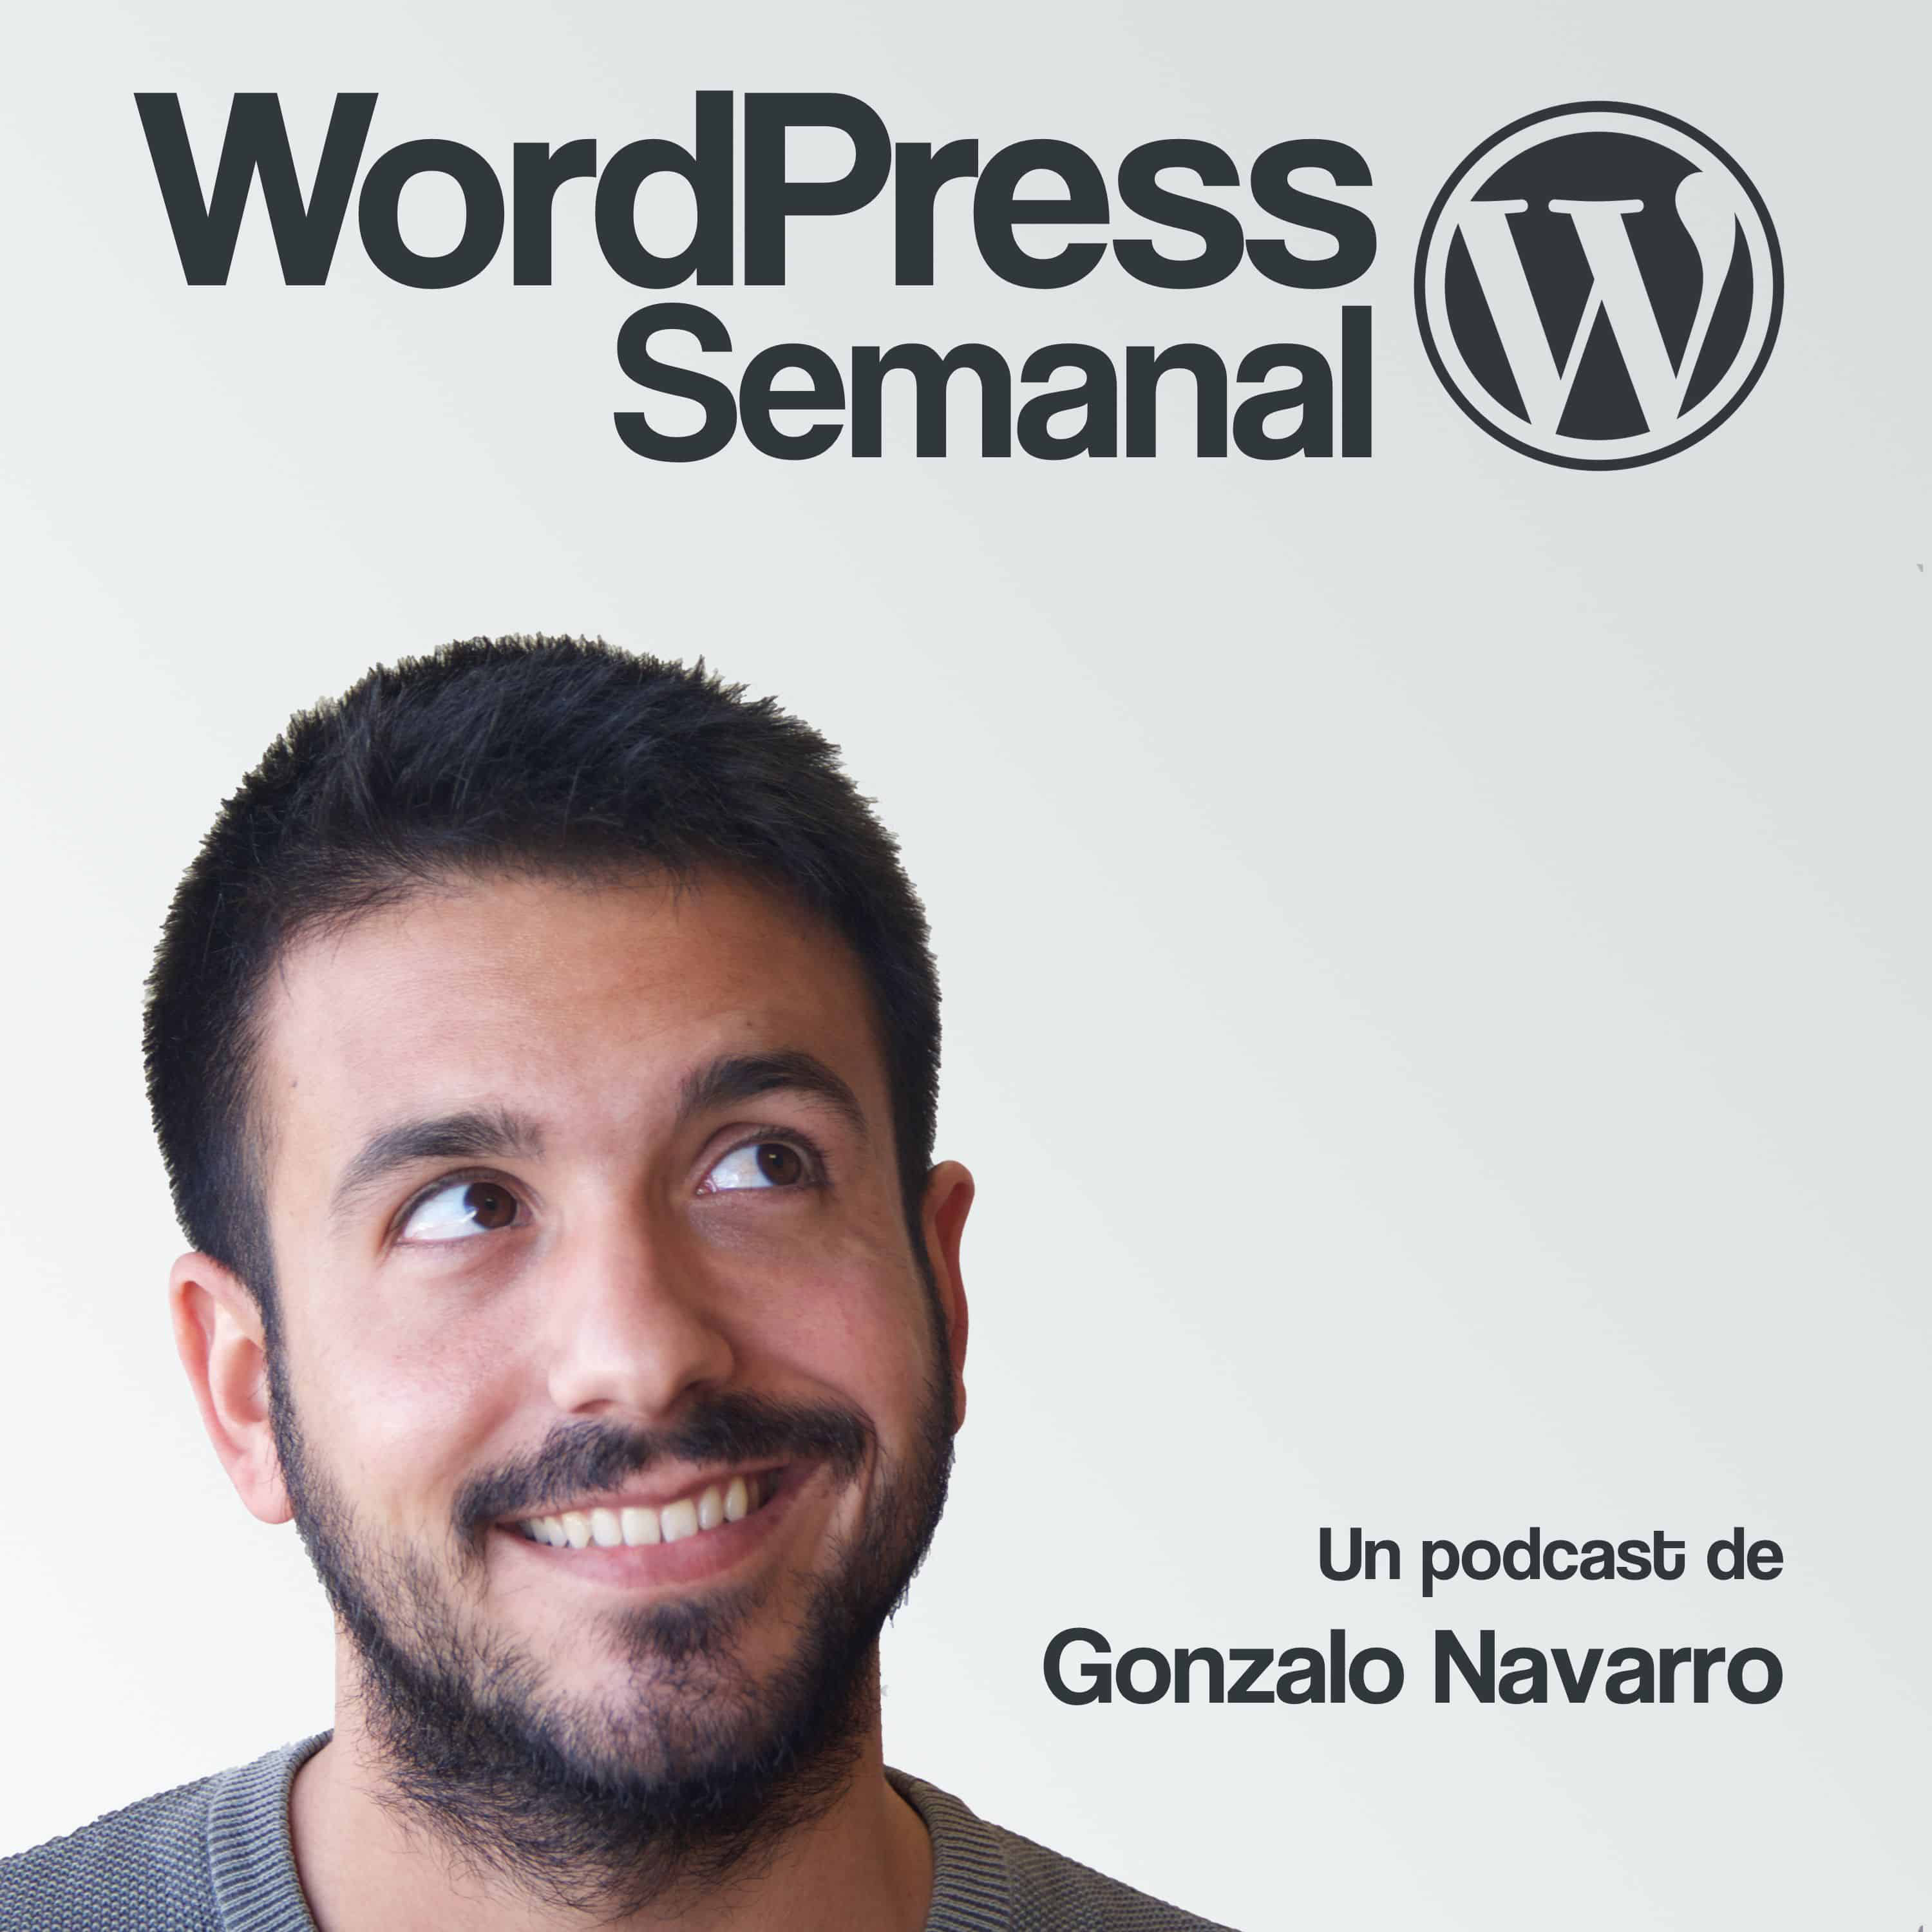 A highlight from 290 | WP Q&A: Soporte, redactores, buscadores, chats 